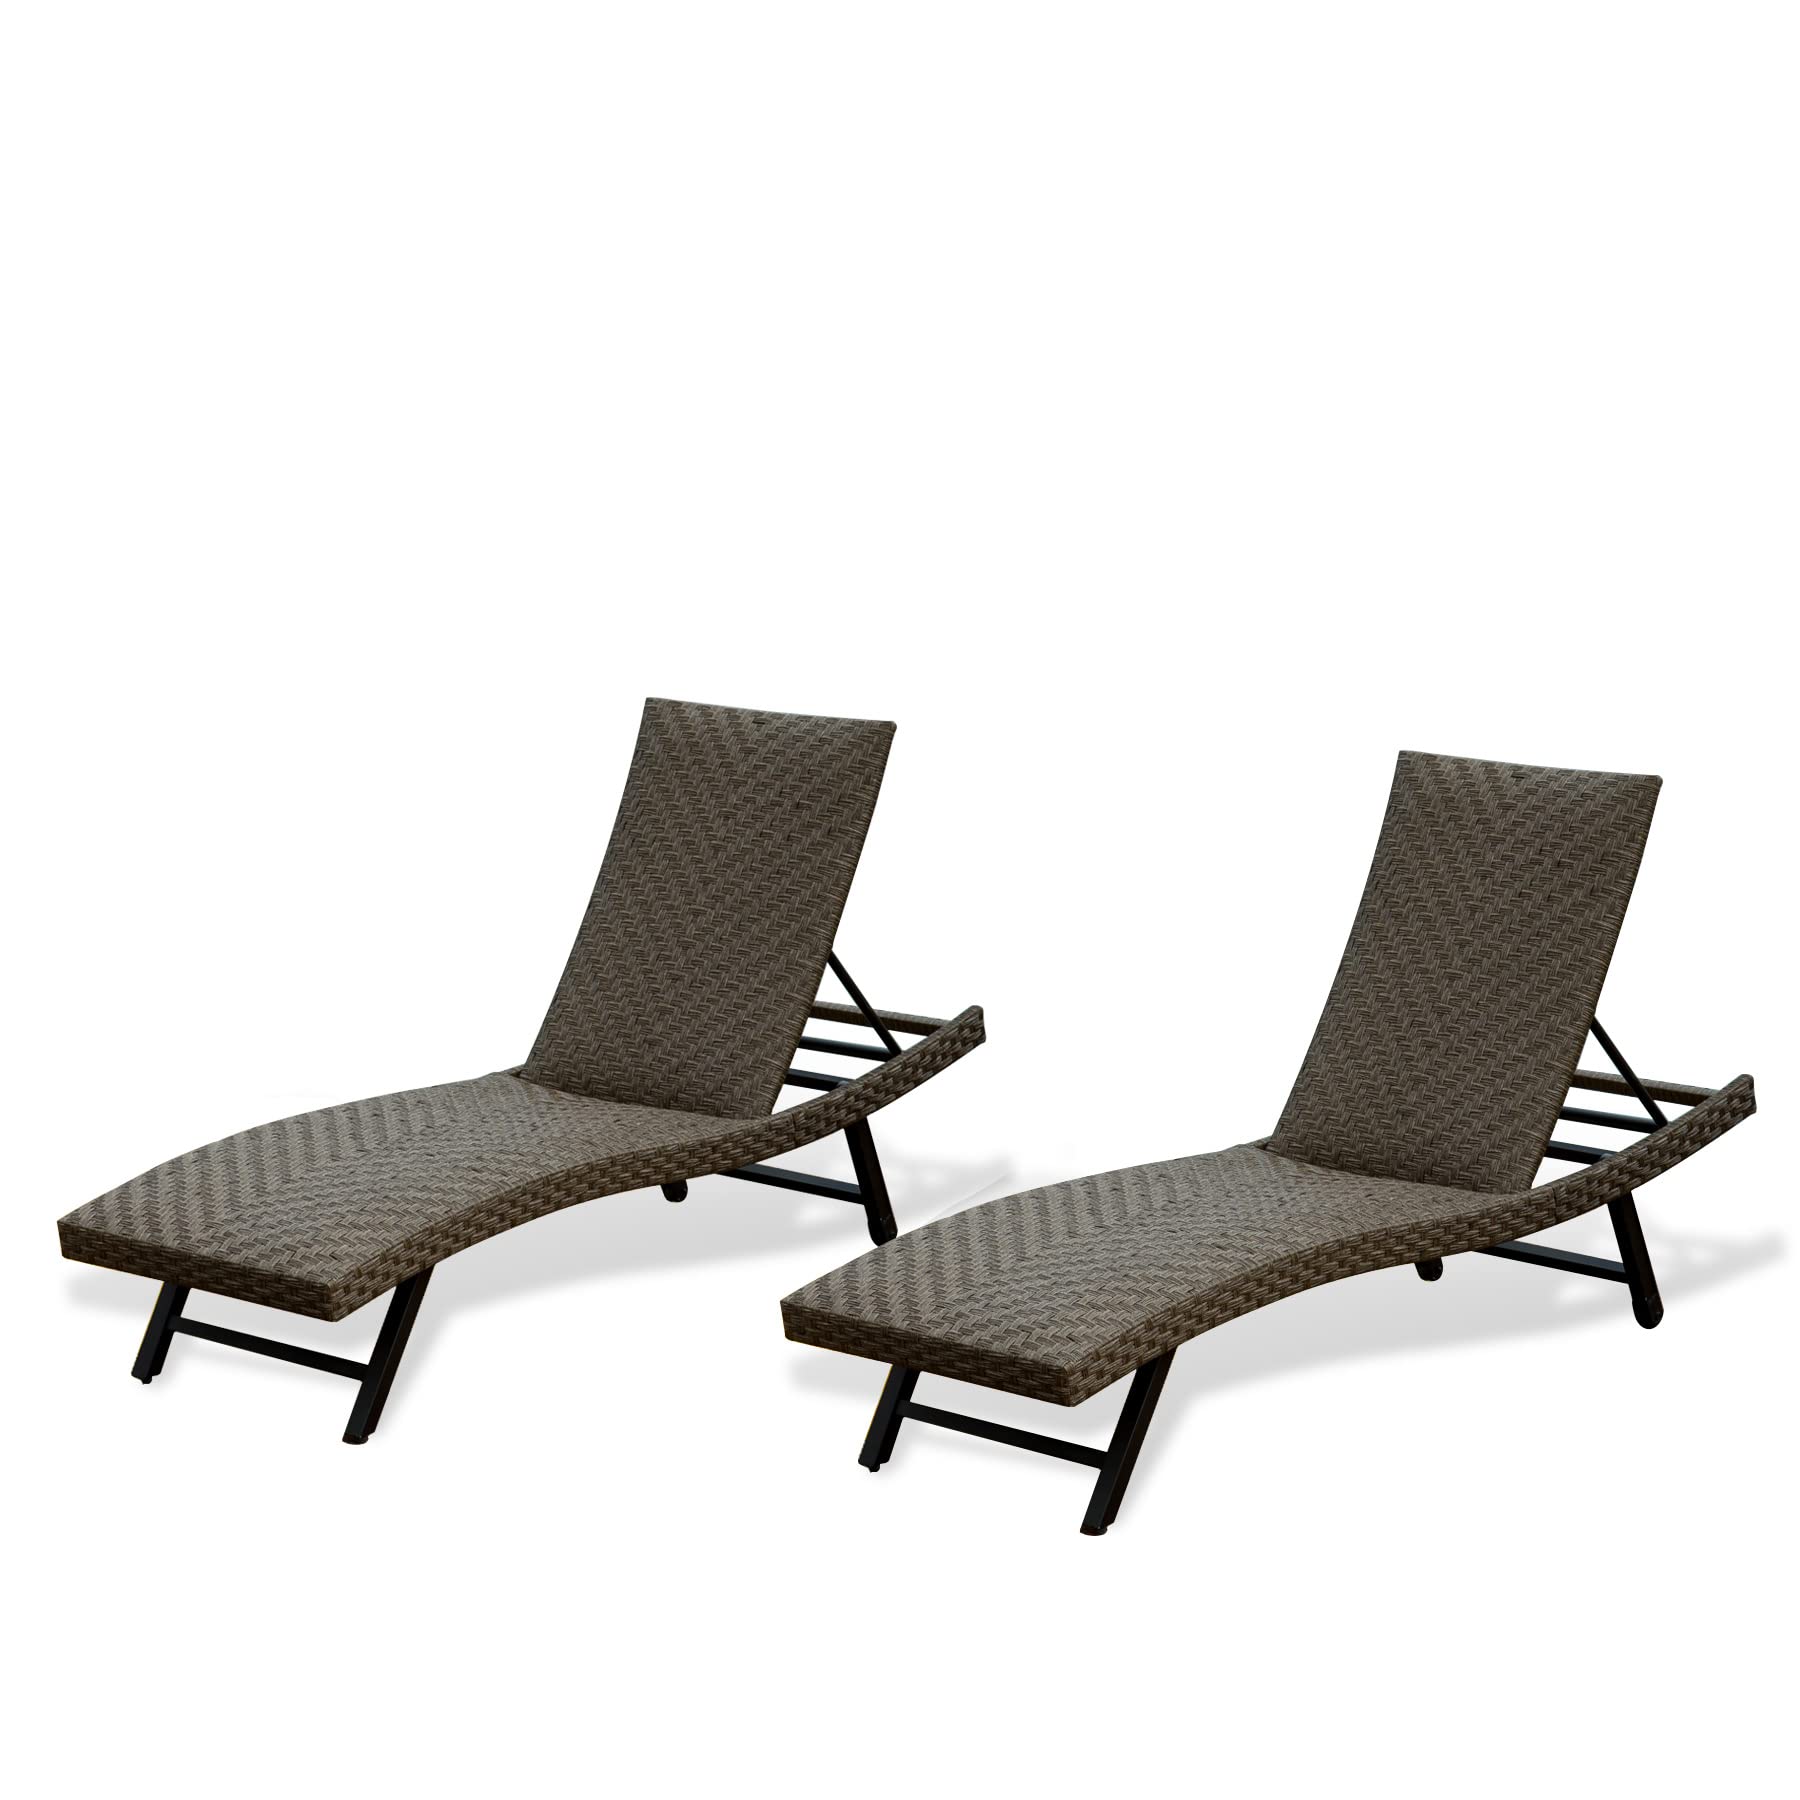 Mydepot Domi Outdoor Living PE Rattan Chaise Lounge, Set of 2 Patio Reclining Chair, Patio Furniture - image 1 of 8